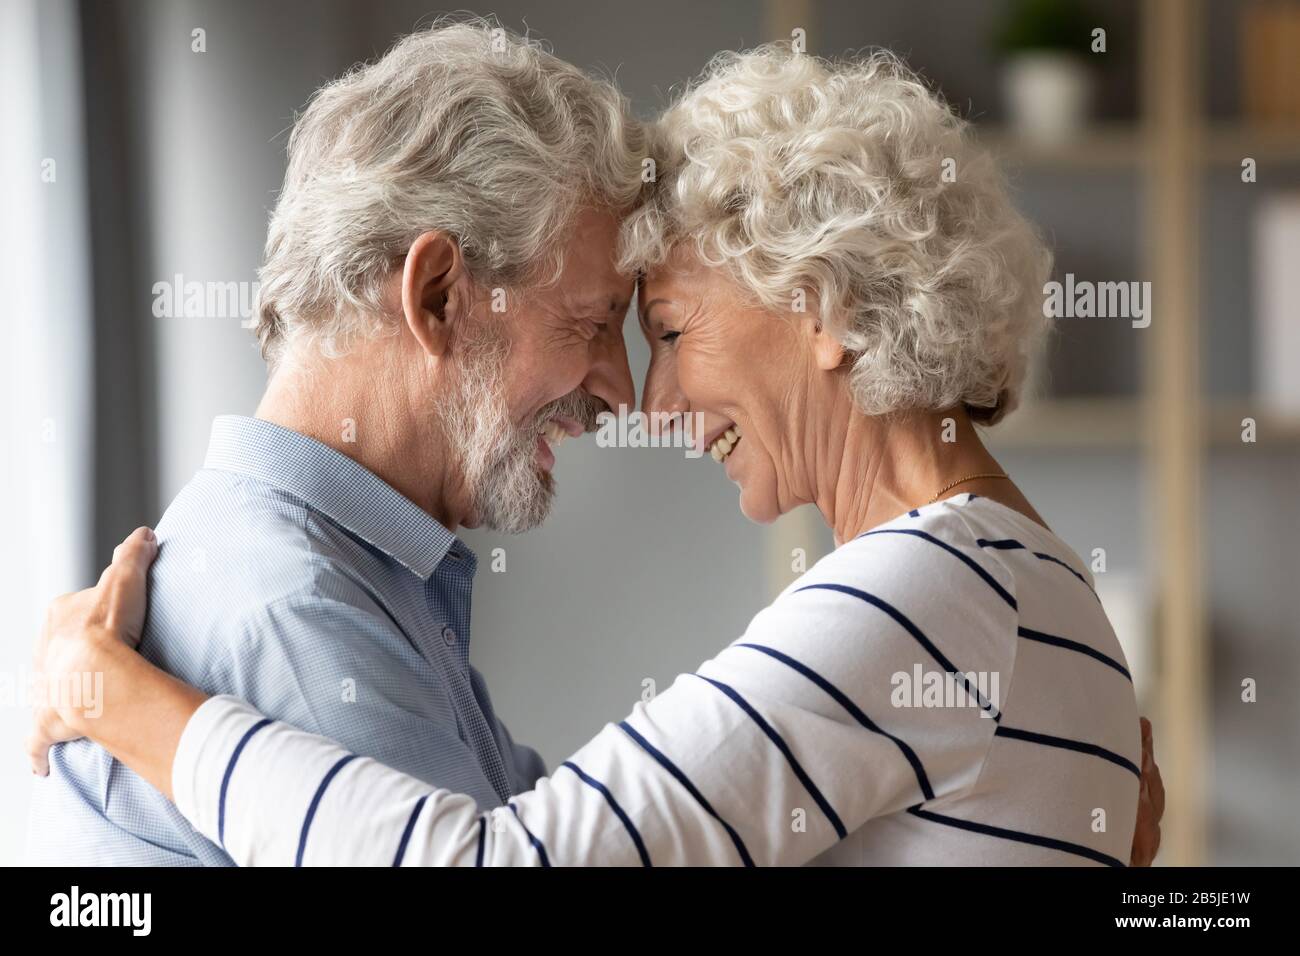 Smiling mature husband and wife share romantic moment together Stock Photo  - Alamy